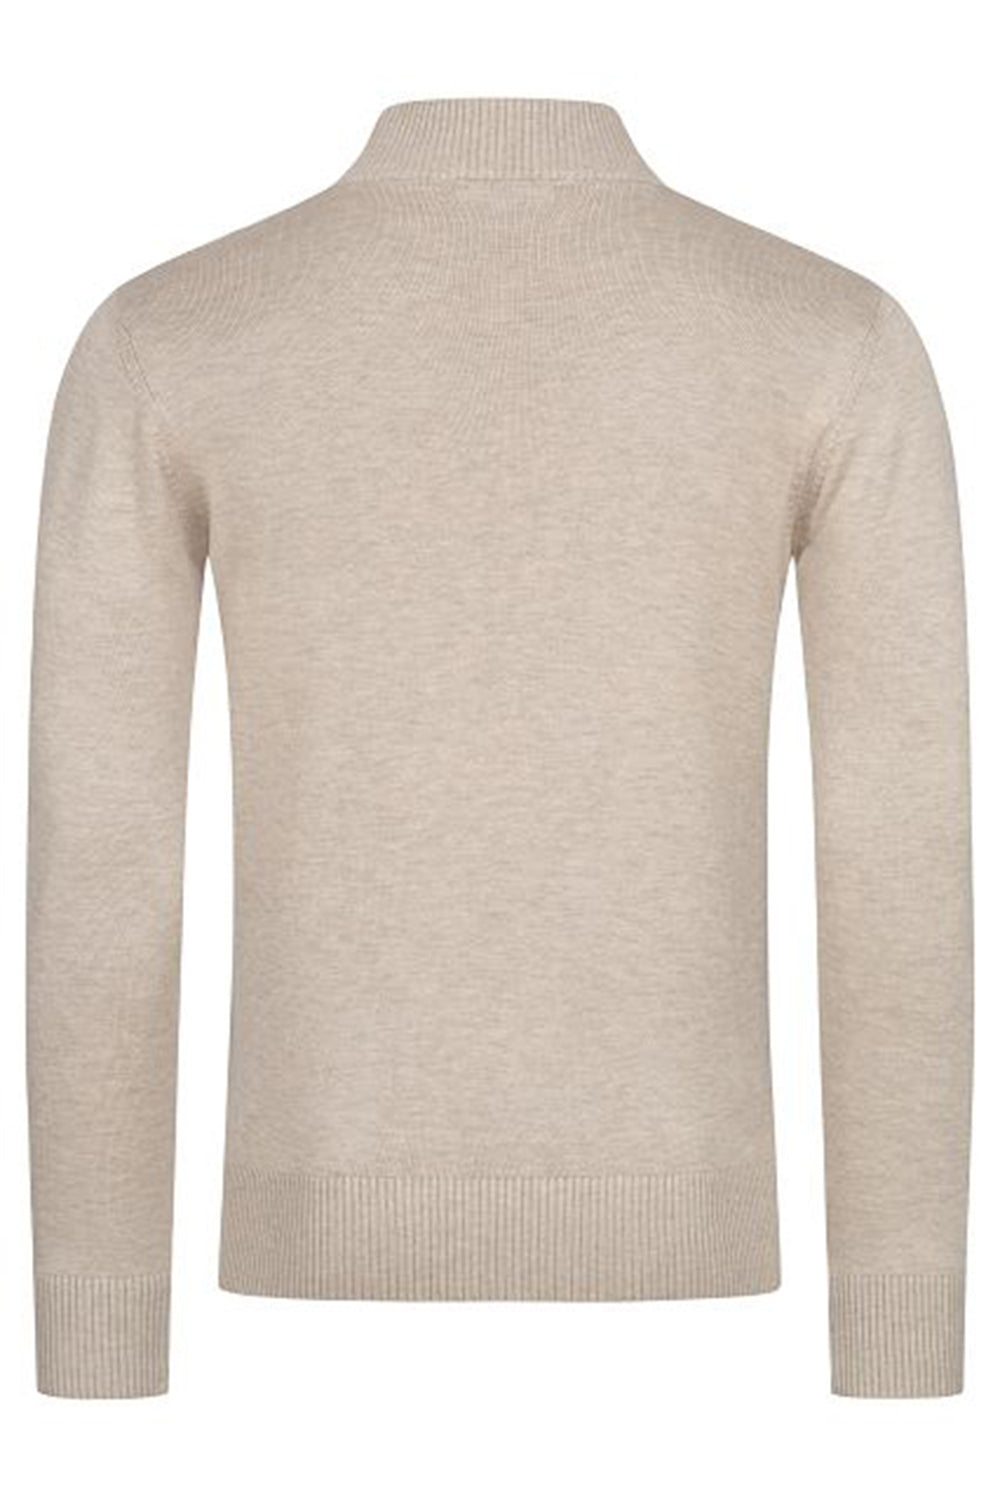 Men's knitted sweater Pascal